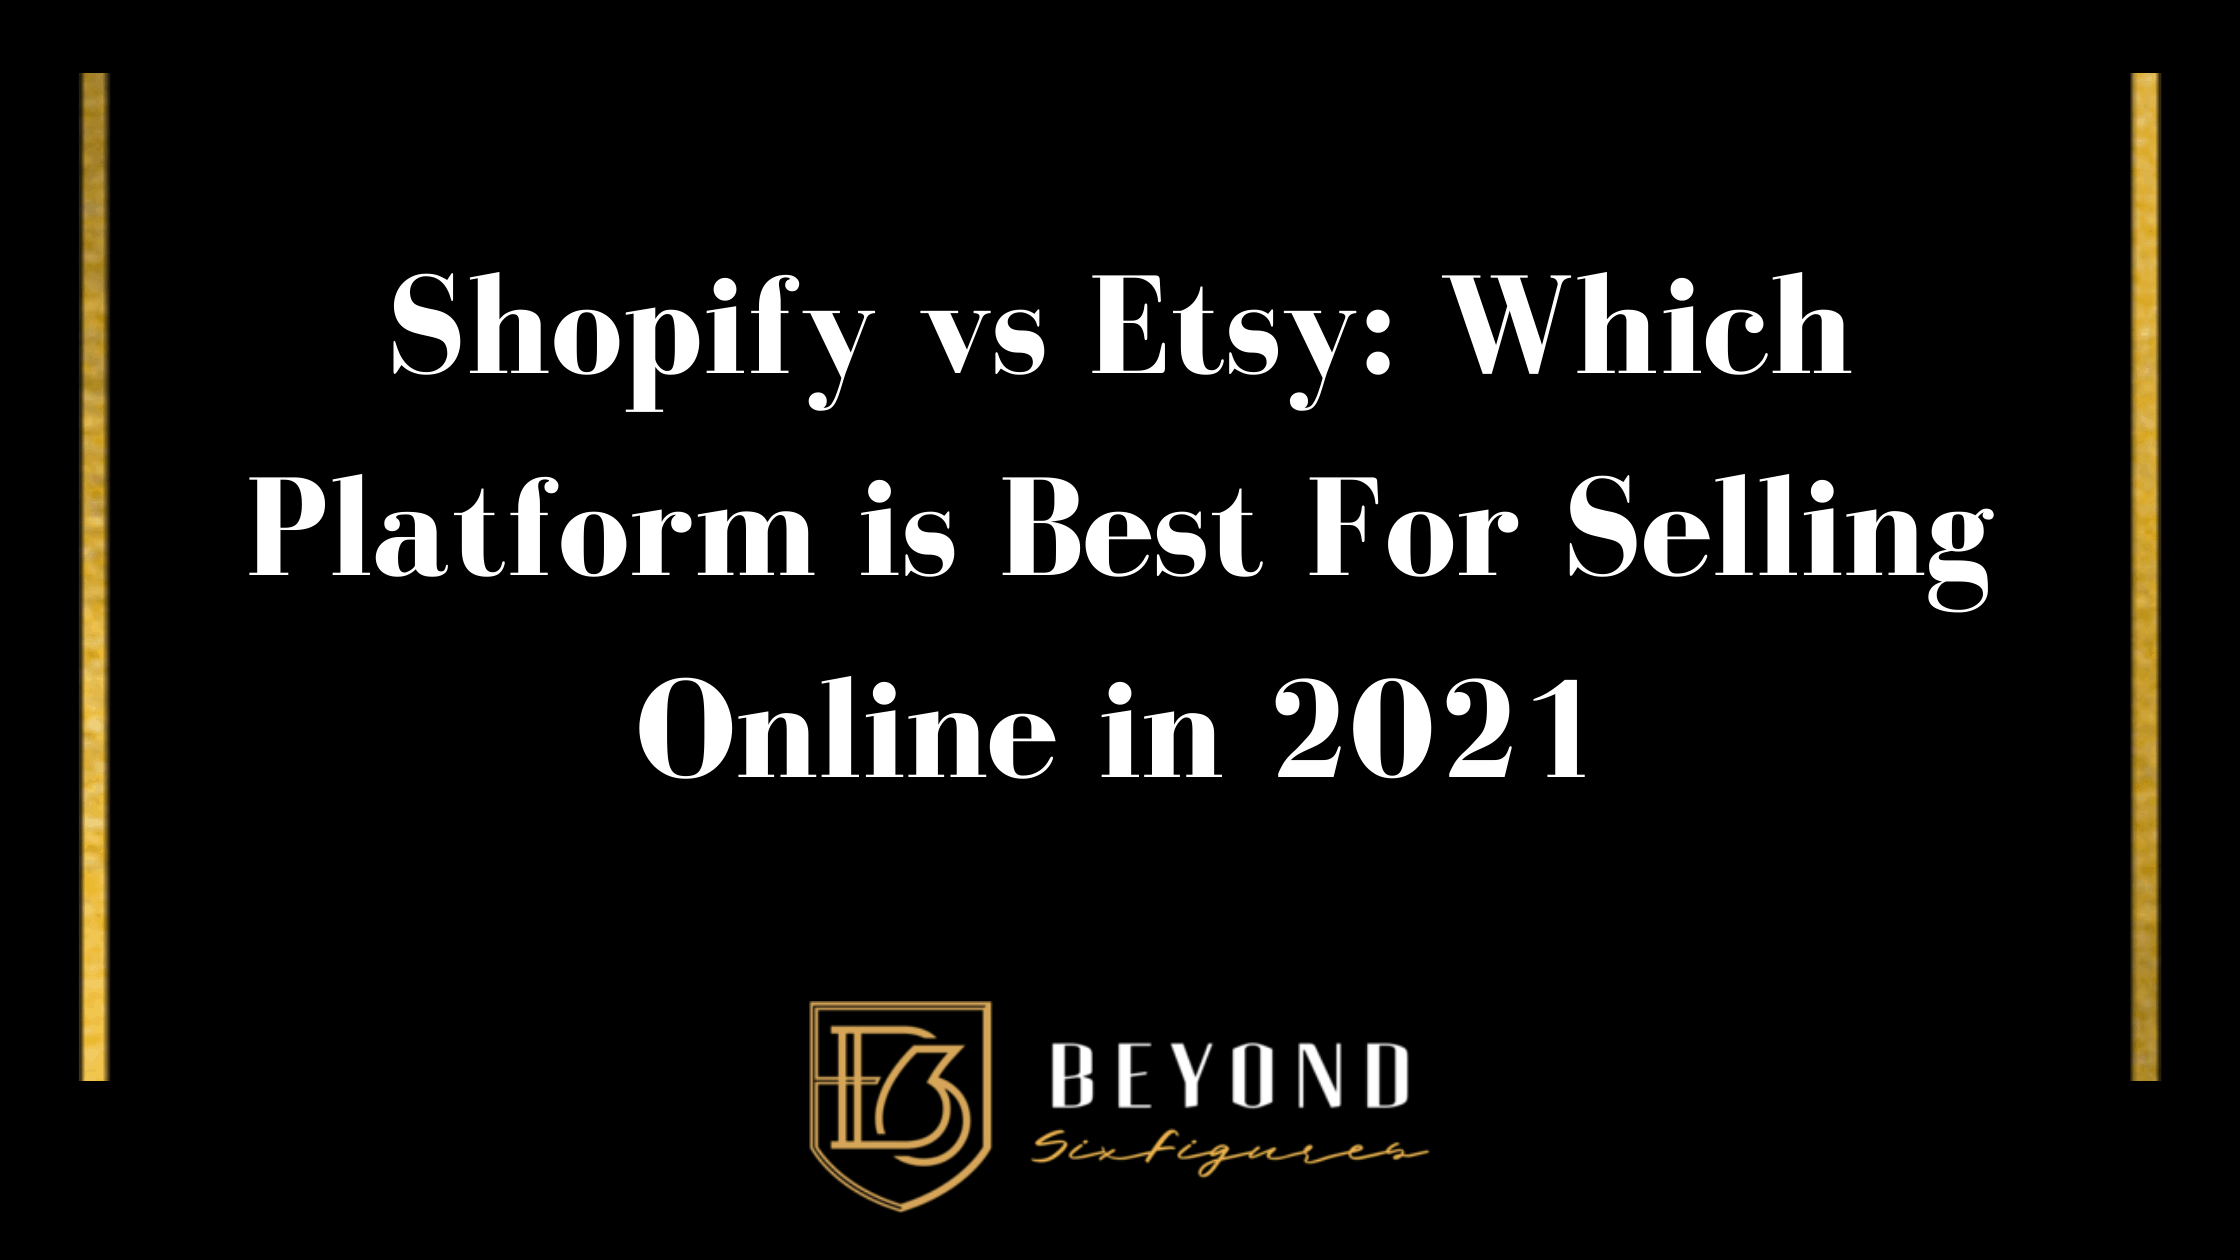 Blog banner of "Shopify vs Etsy: Which Platform is Best For Selling Online in 2021"